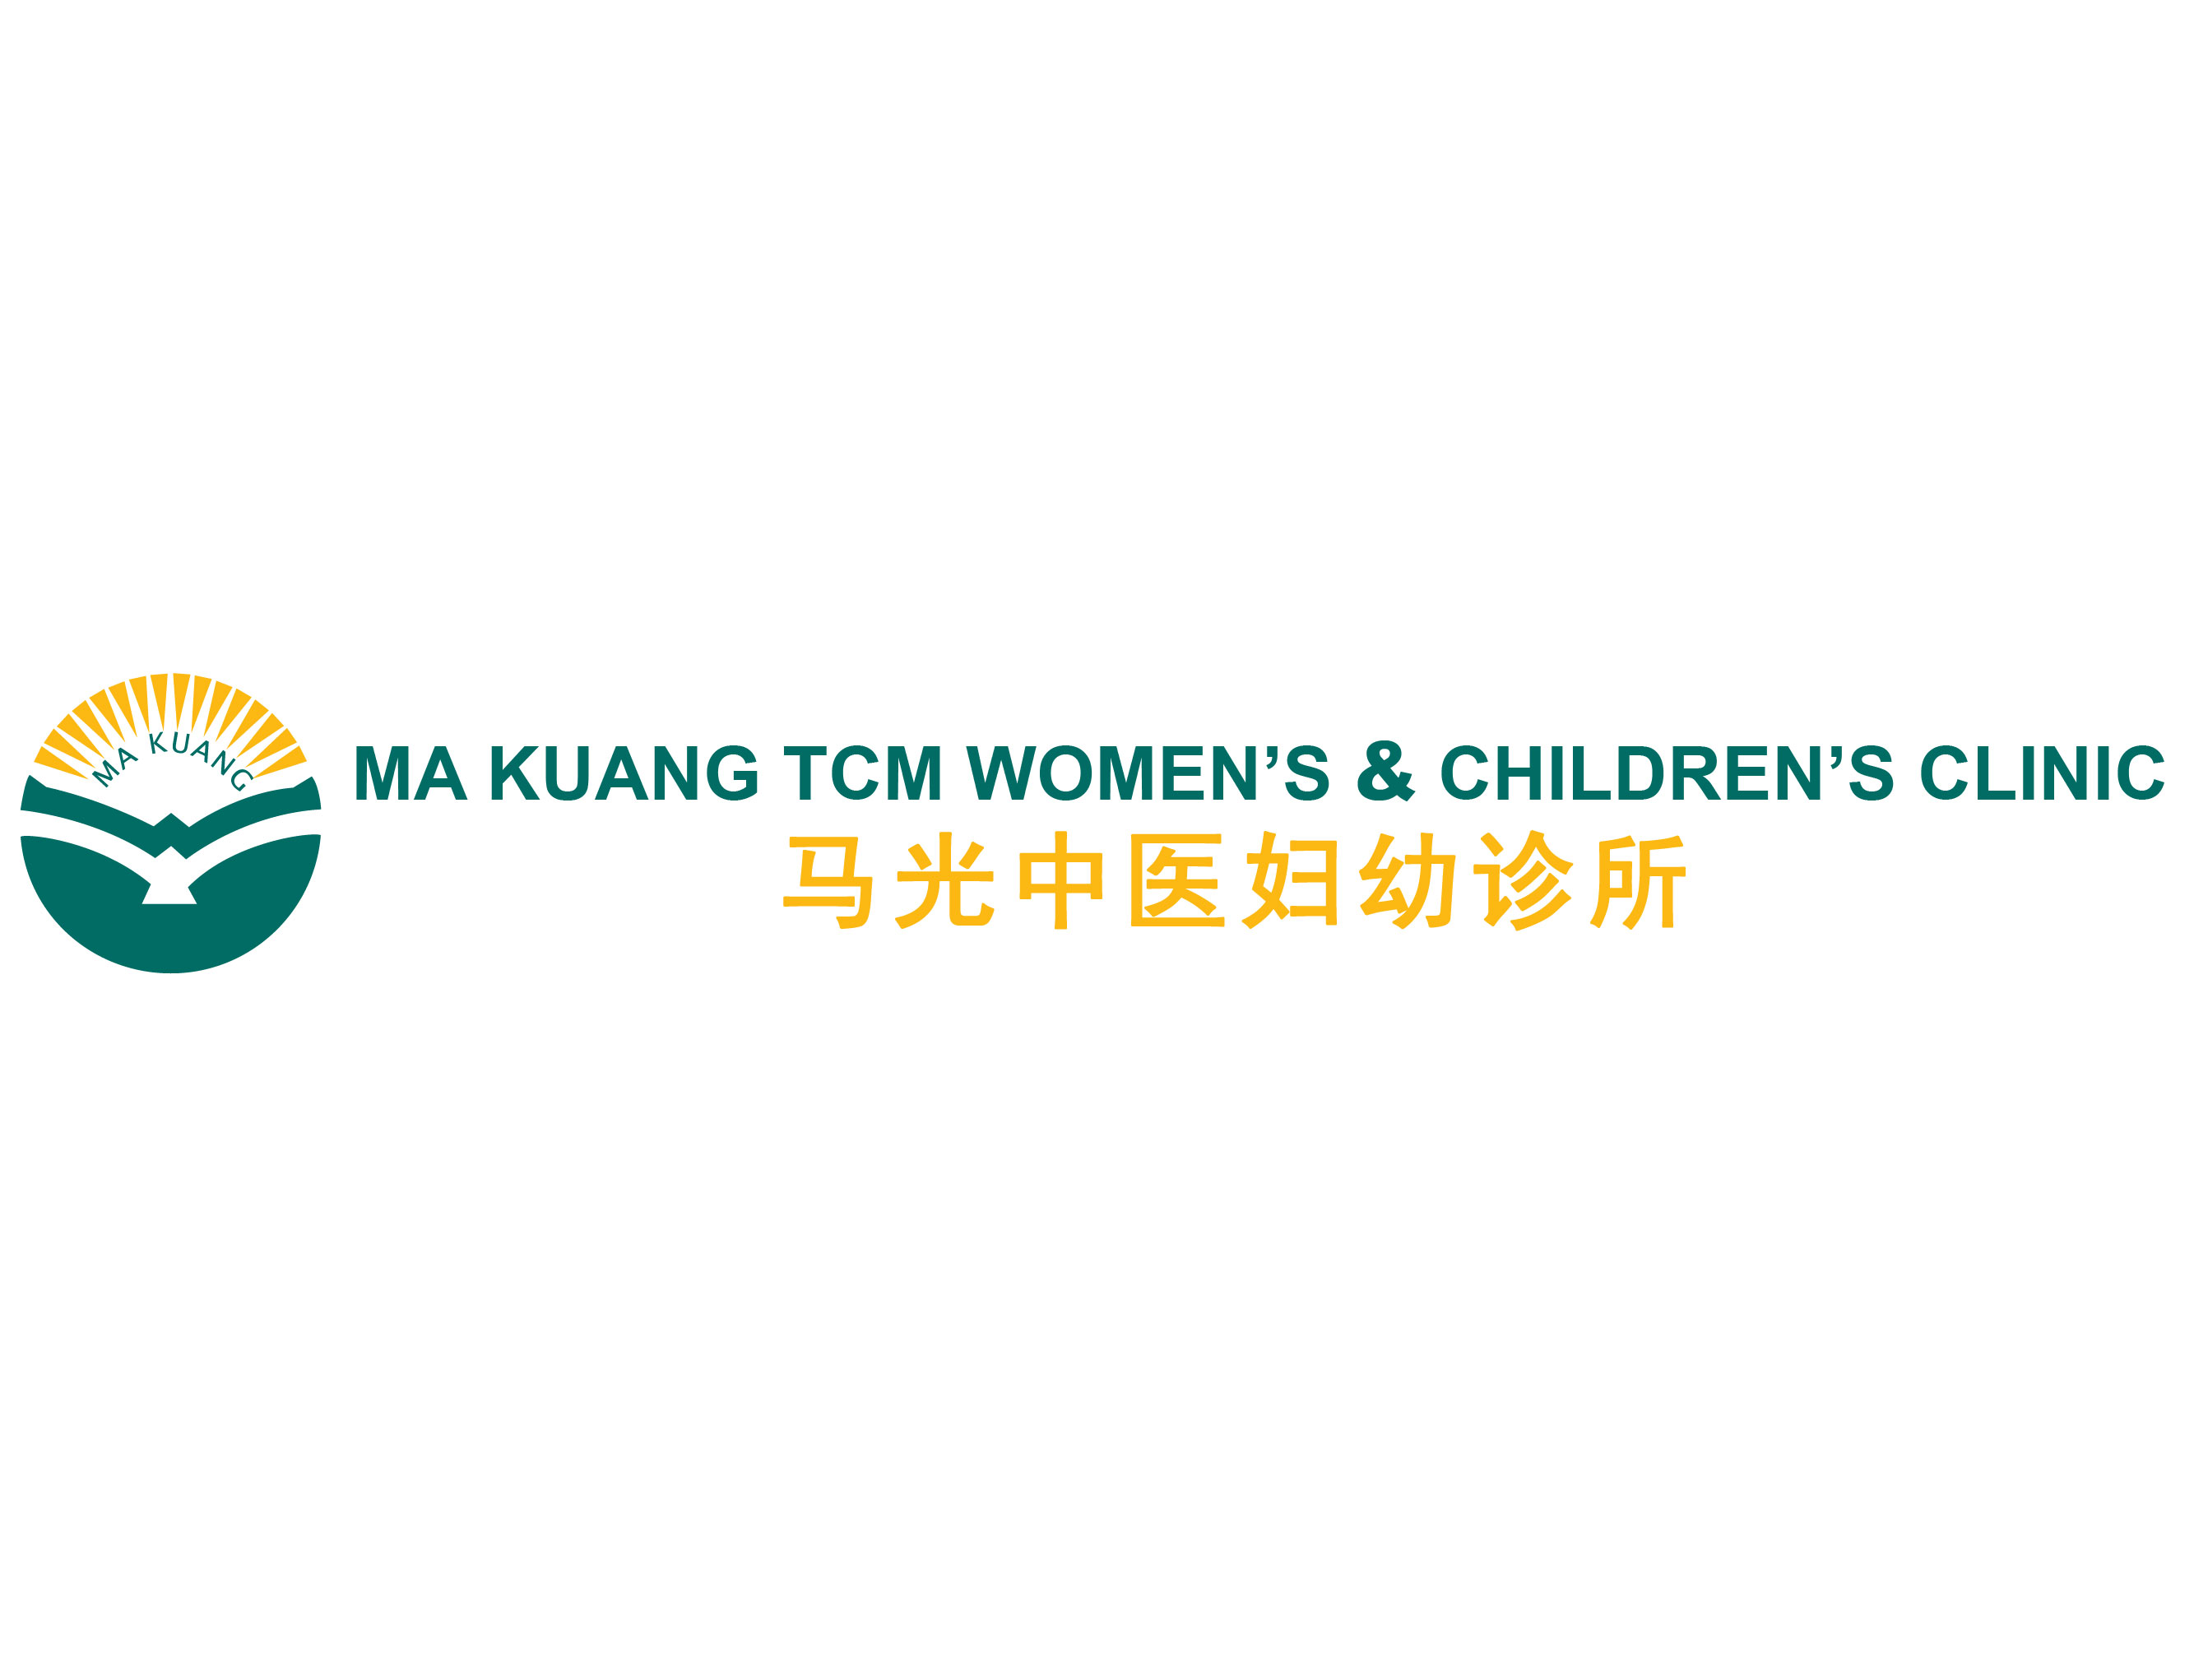 Ma Kuang TCM Women’s and Children’s Clinic